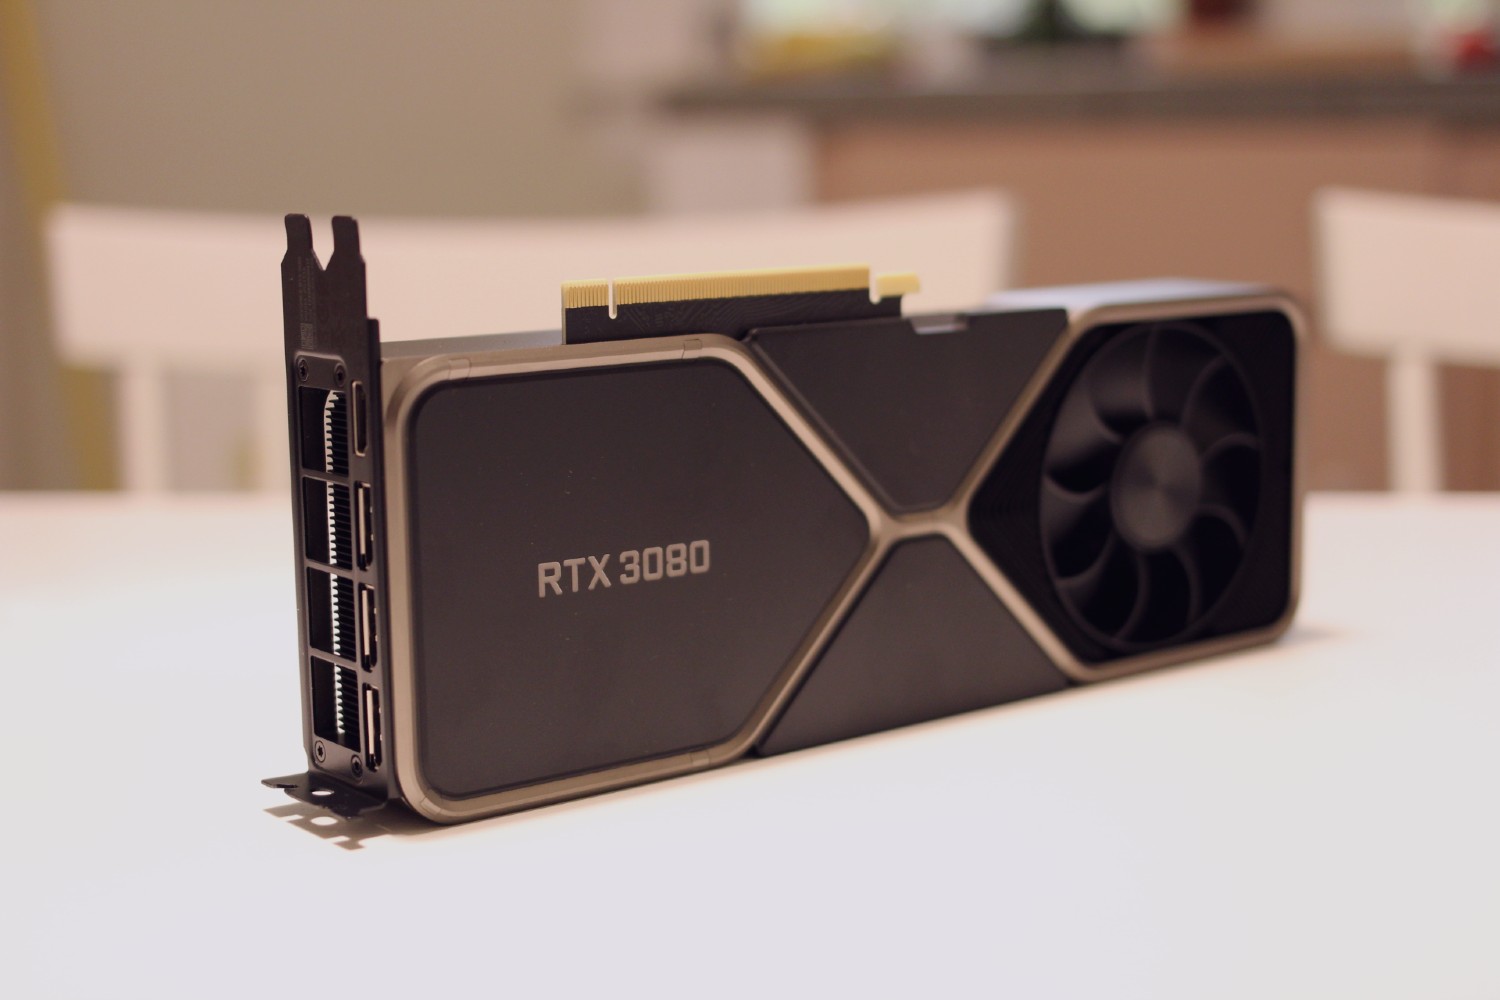 Nvidia RTX 3080 Review: A New Standard For PC Gaming